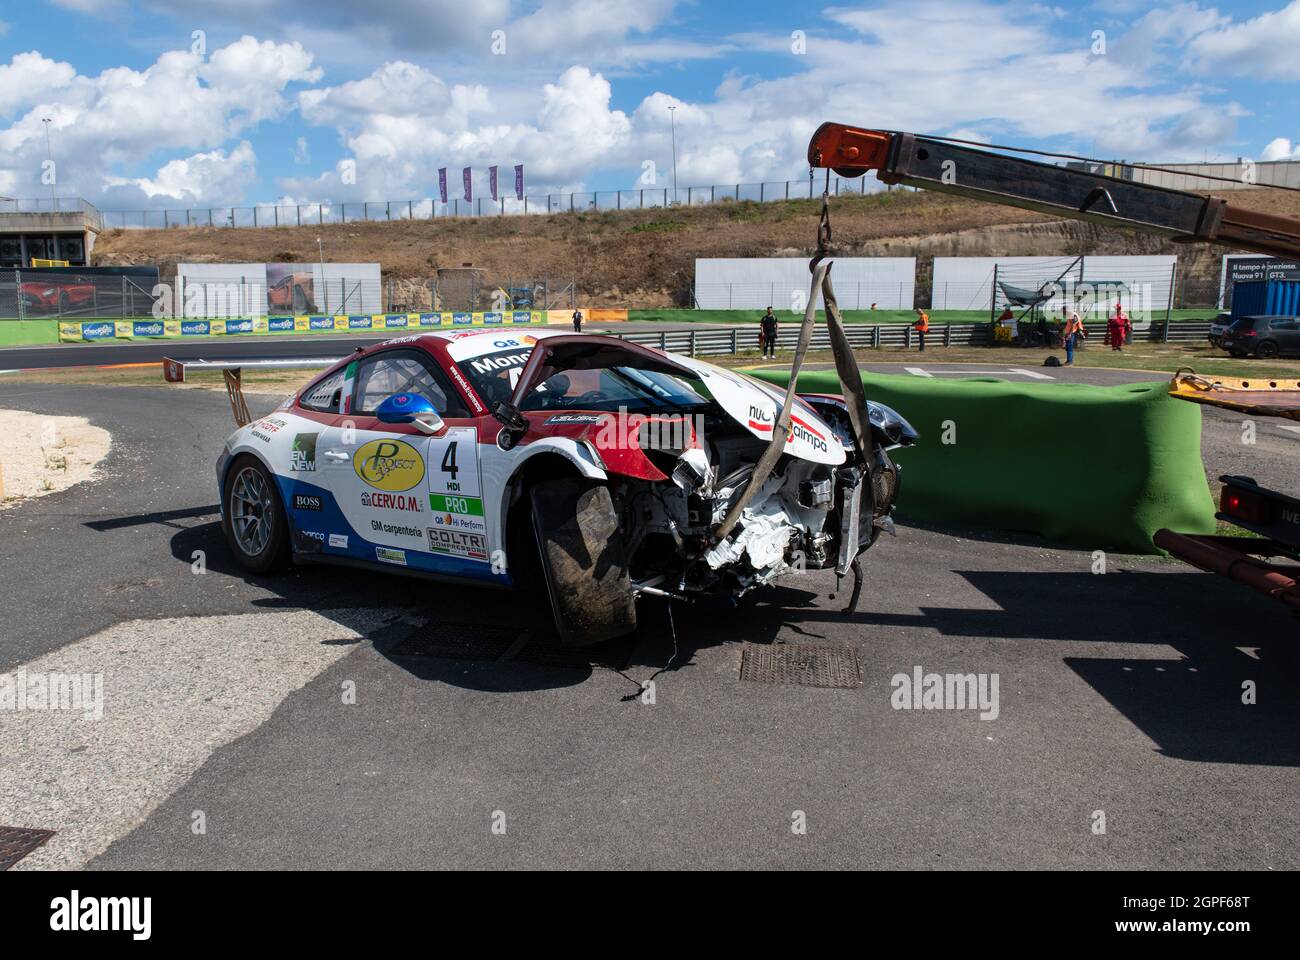 Vallelunga, italy september 19th 2021 Aci racing weekend. Race car wrecked after big crash during competition Stock Photo